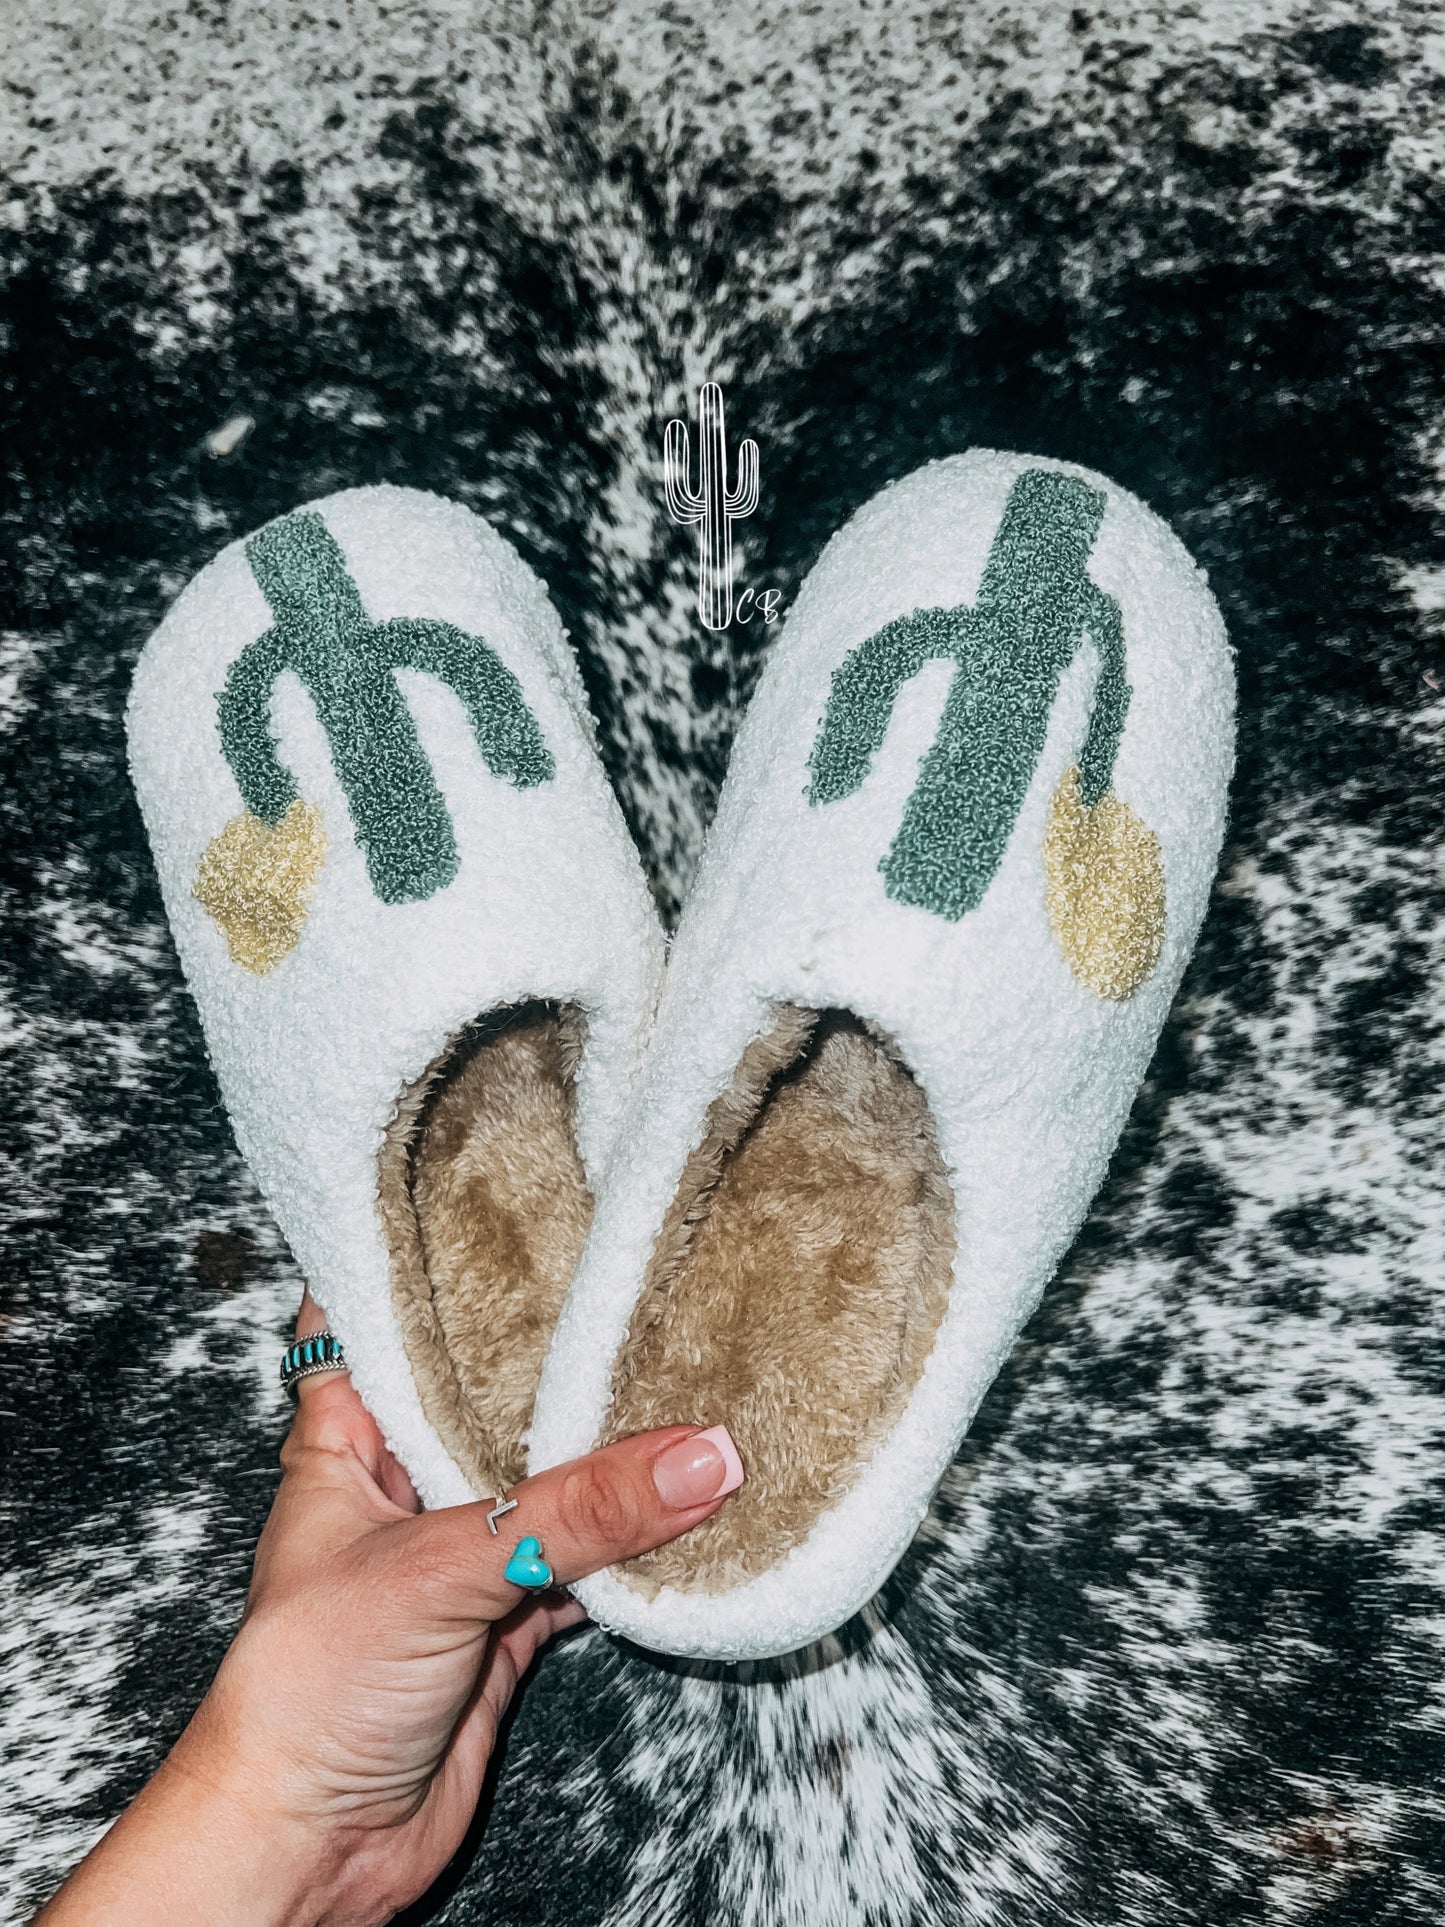 the Keep Me |Cozy| Slippers